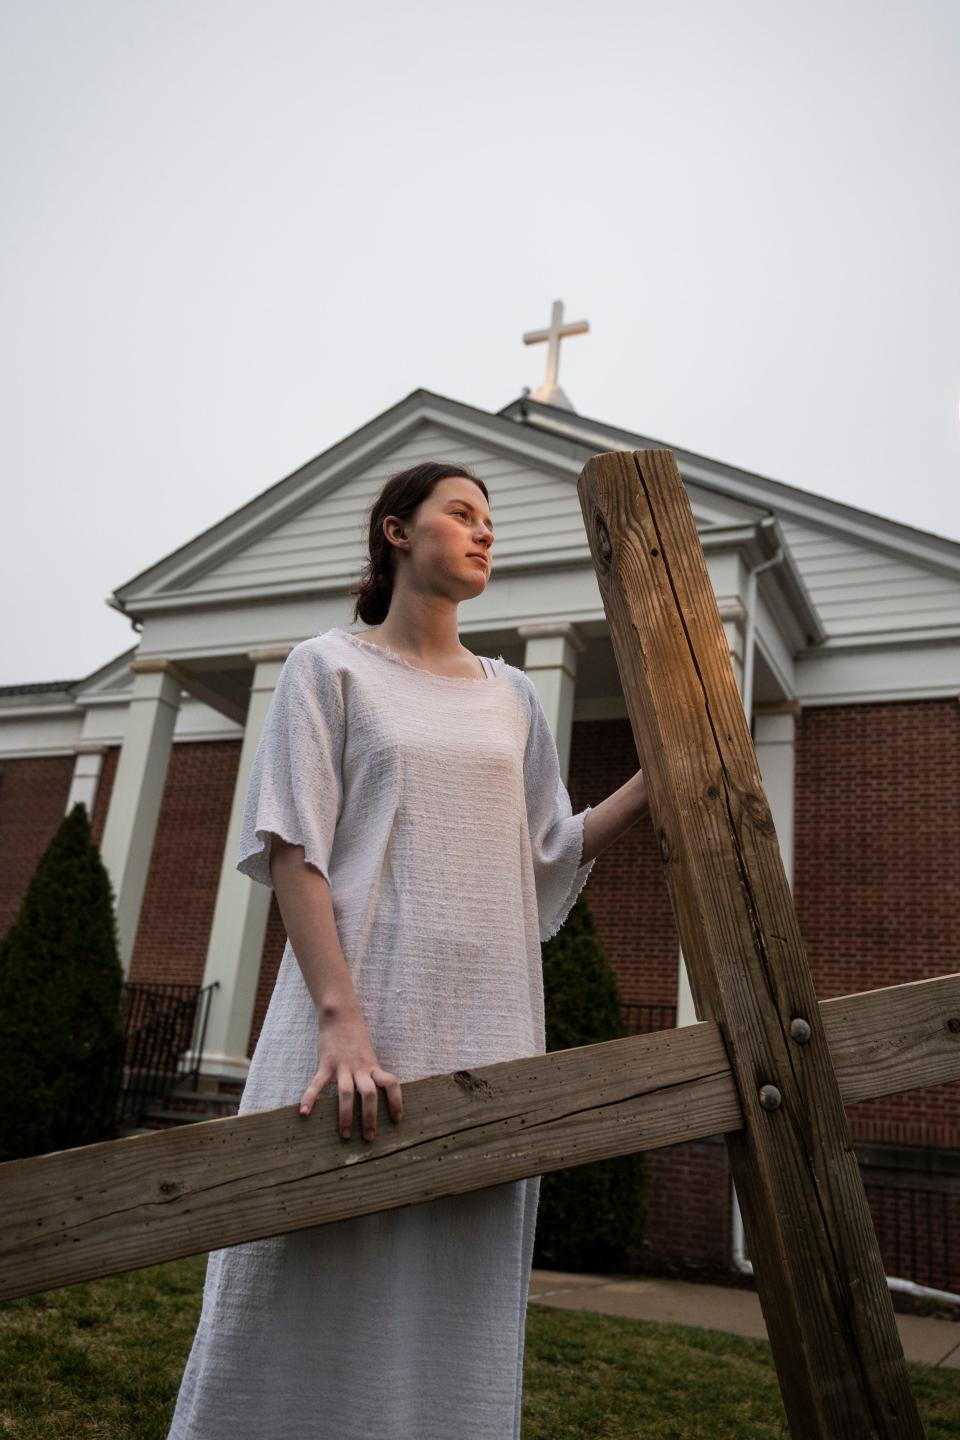 Madeline Harmon, 15, will be playing Jesus in the "Cross Carry" a play the Christian Drama School of New Jersey has been performing for more than 20 years. Harmon, dressed in her Jesus costume, holds a cross outside the Presbyterian Church of Morris Plains, where the drama school practices, on Wednesday, April 4.